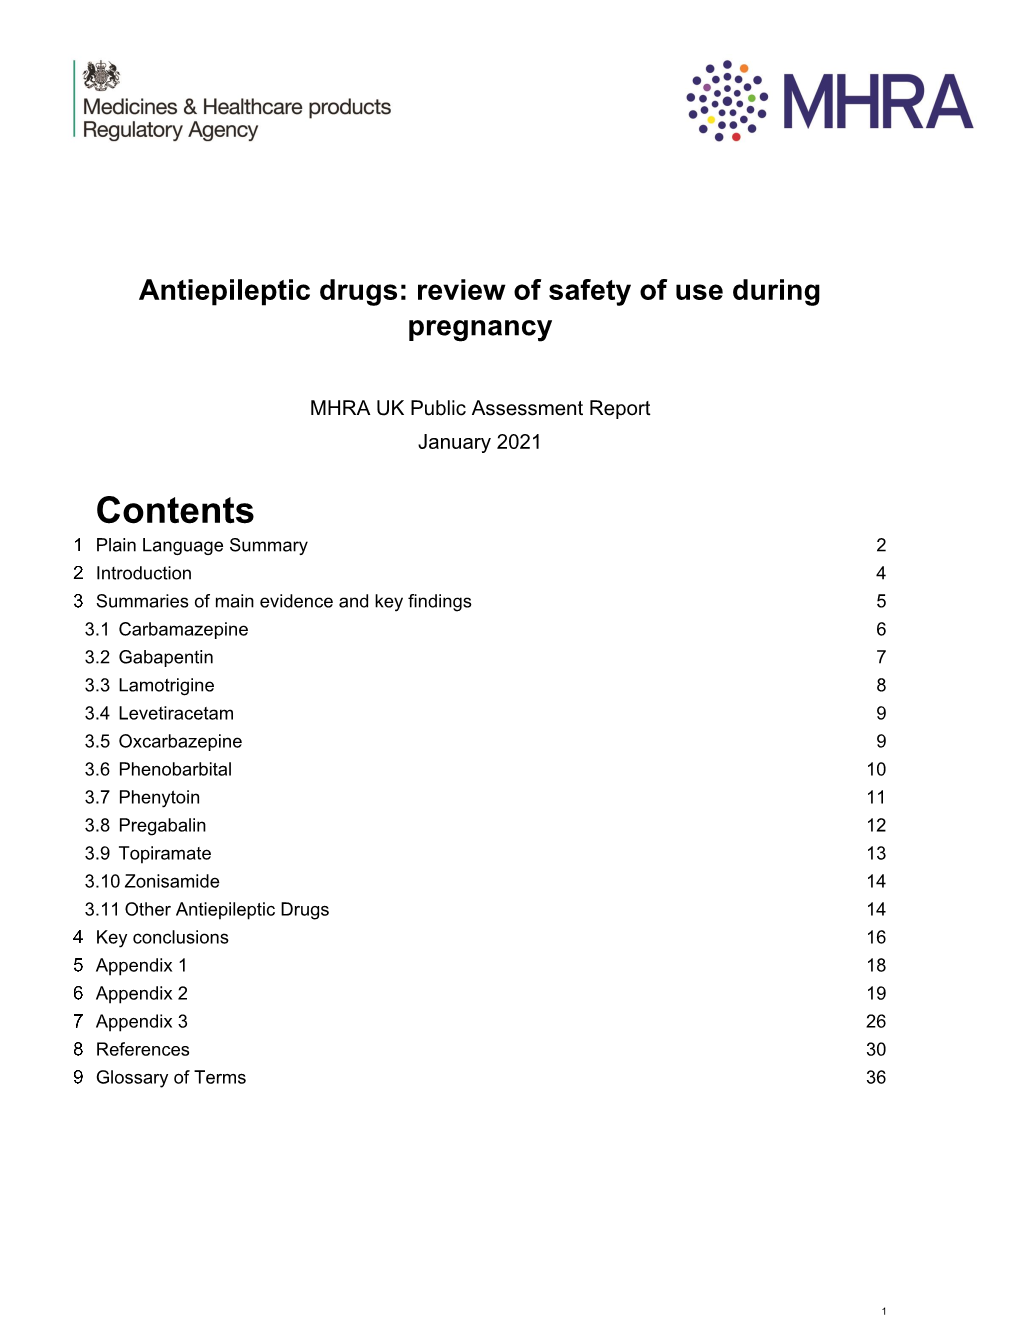 Antiepileptic Drugs: Review of Safety of Use During Pregnancy